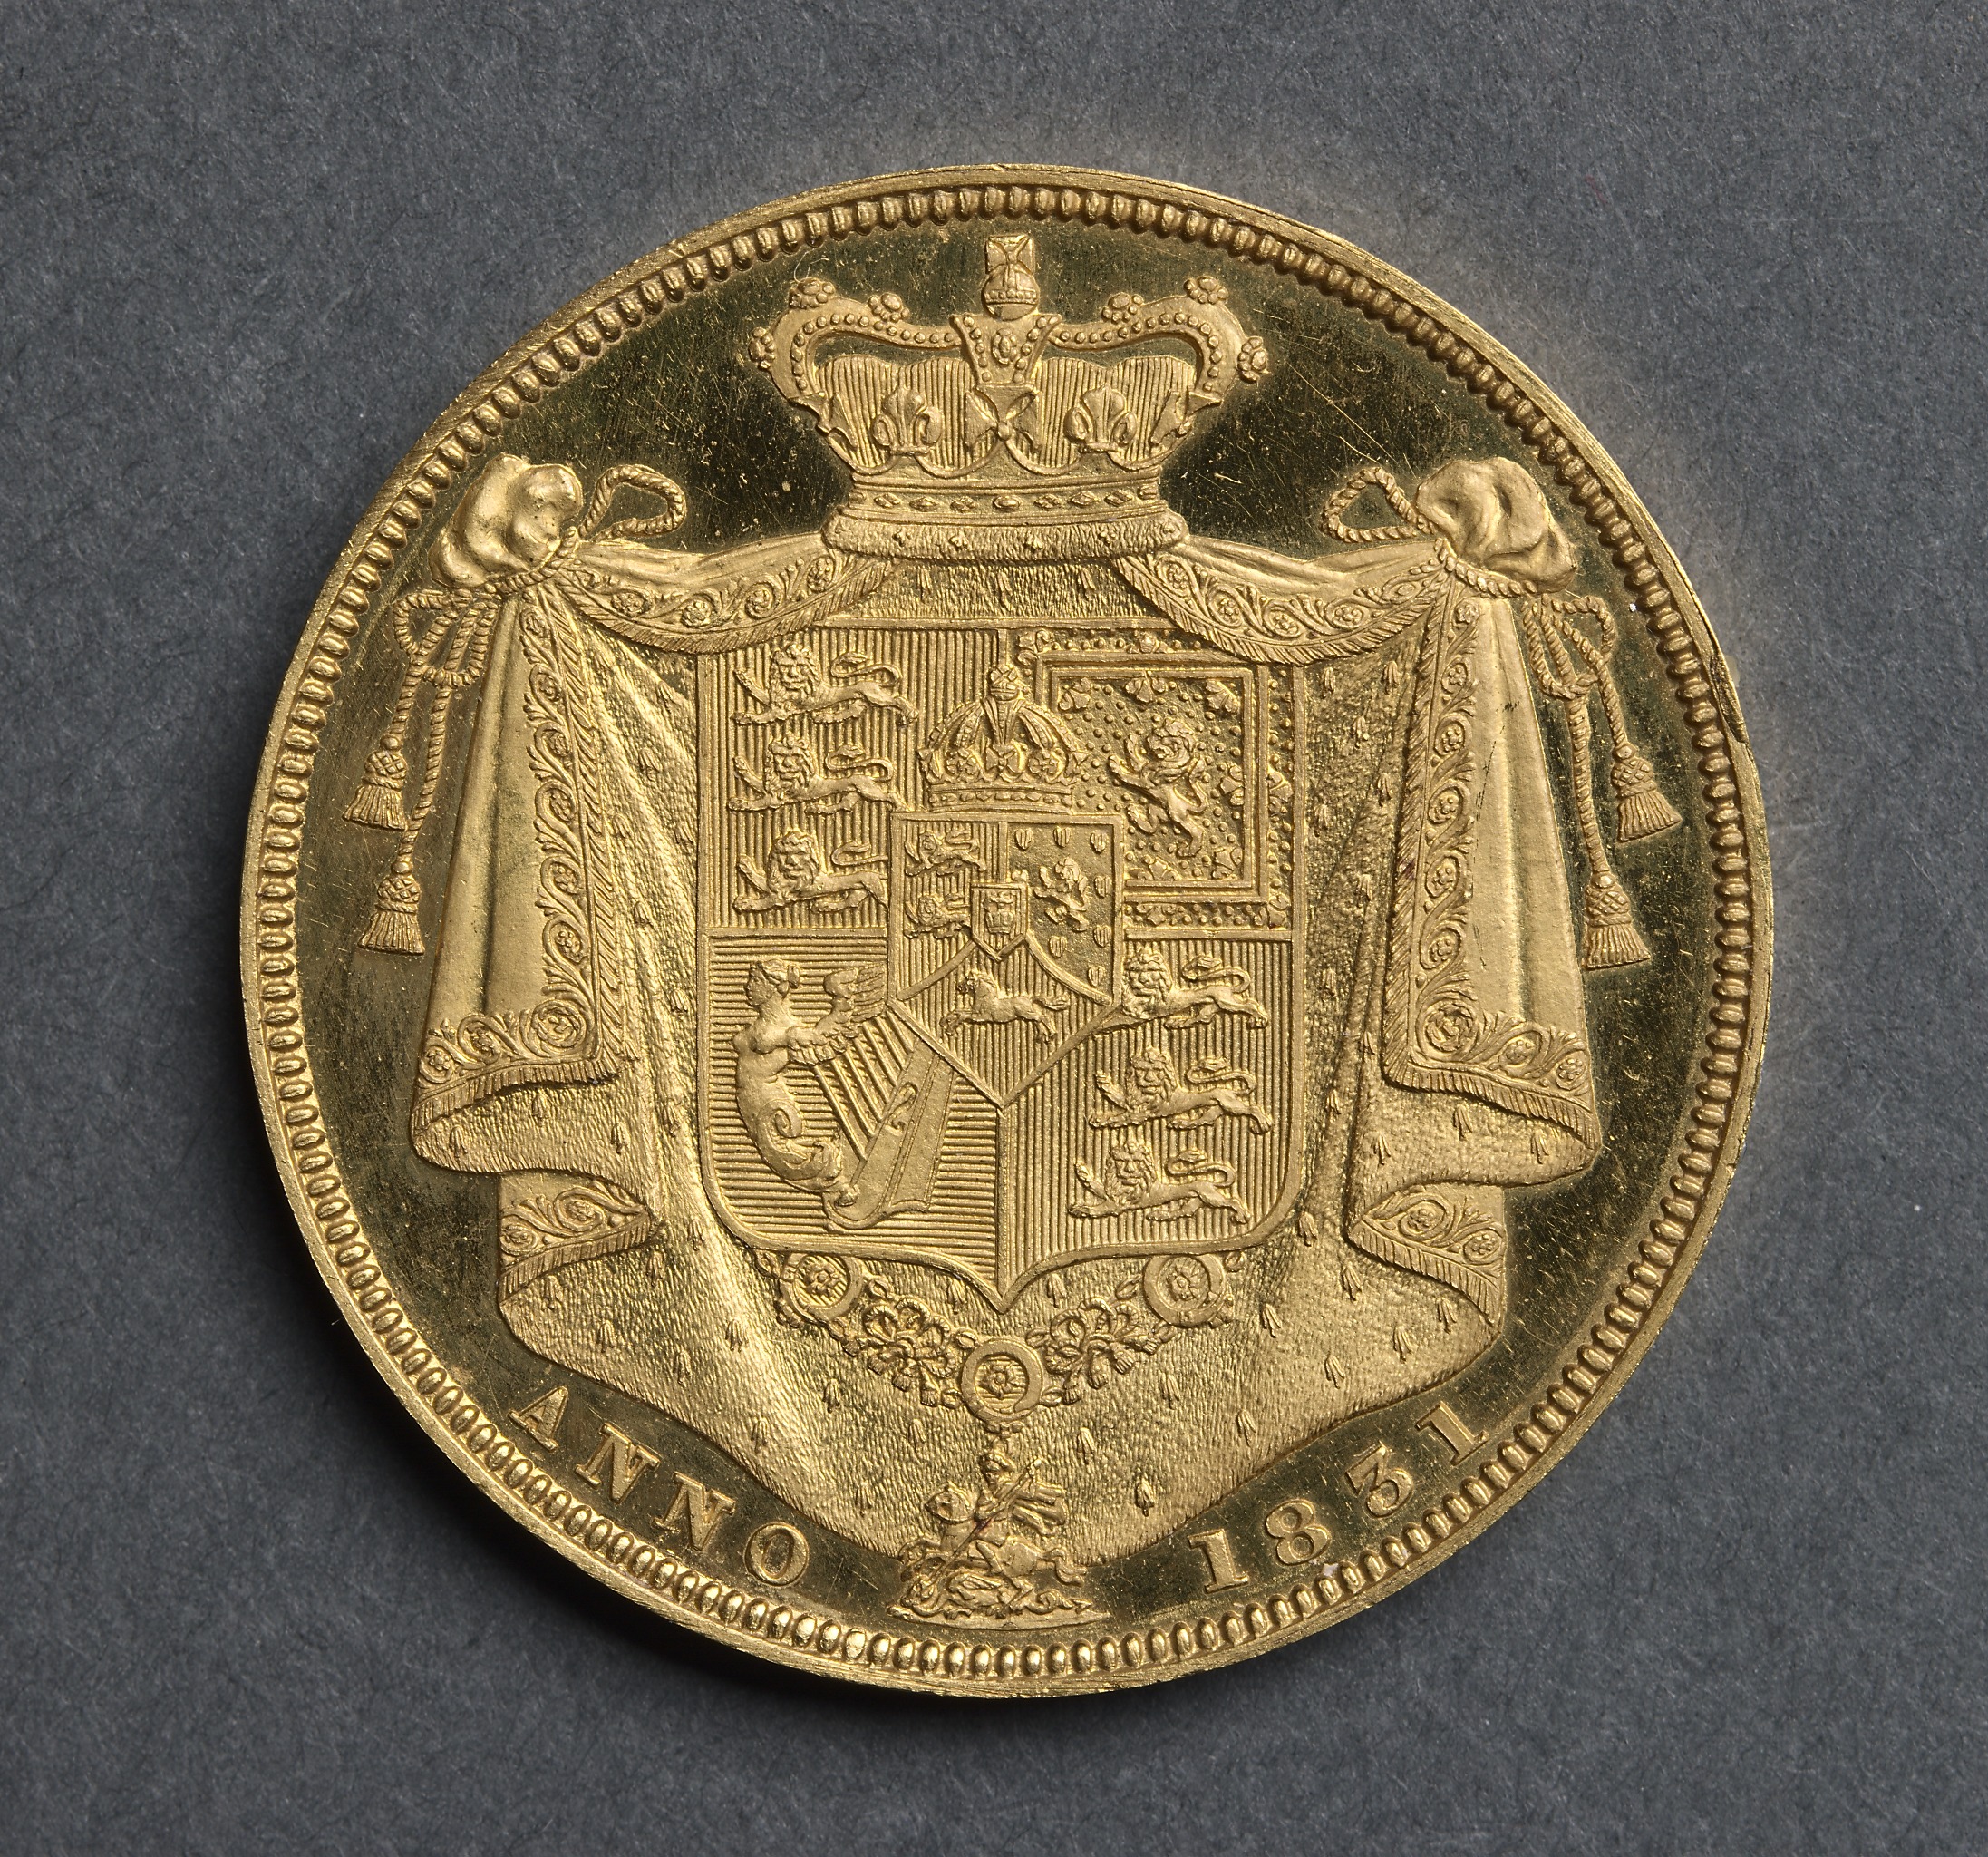 Two Pound Piece: Crowned and Heavily Mantled Shield of Arms (reverse)